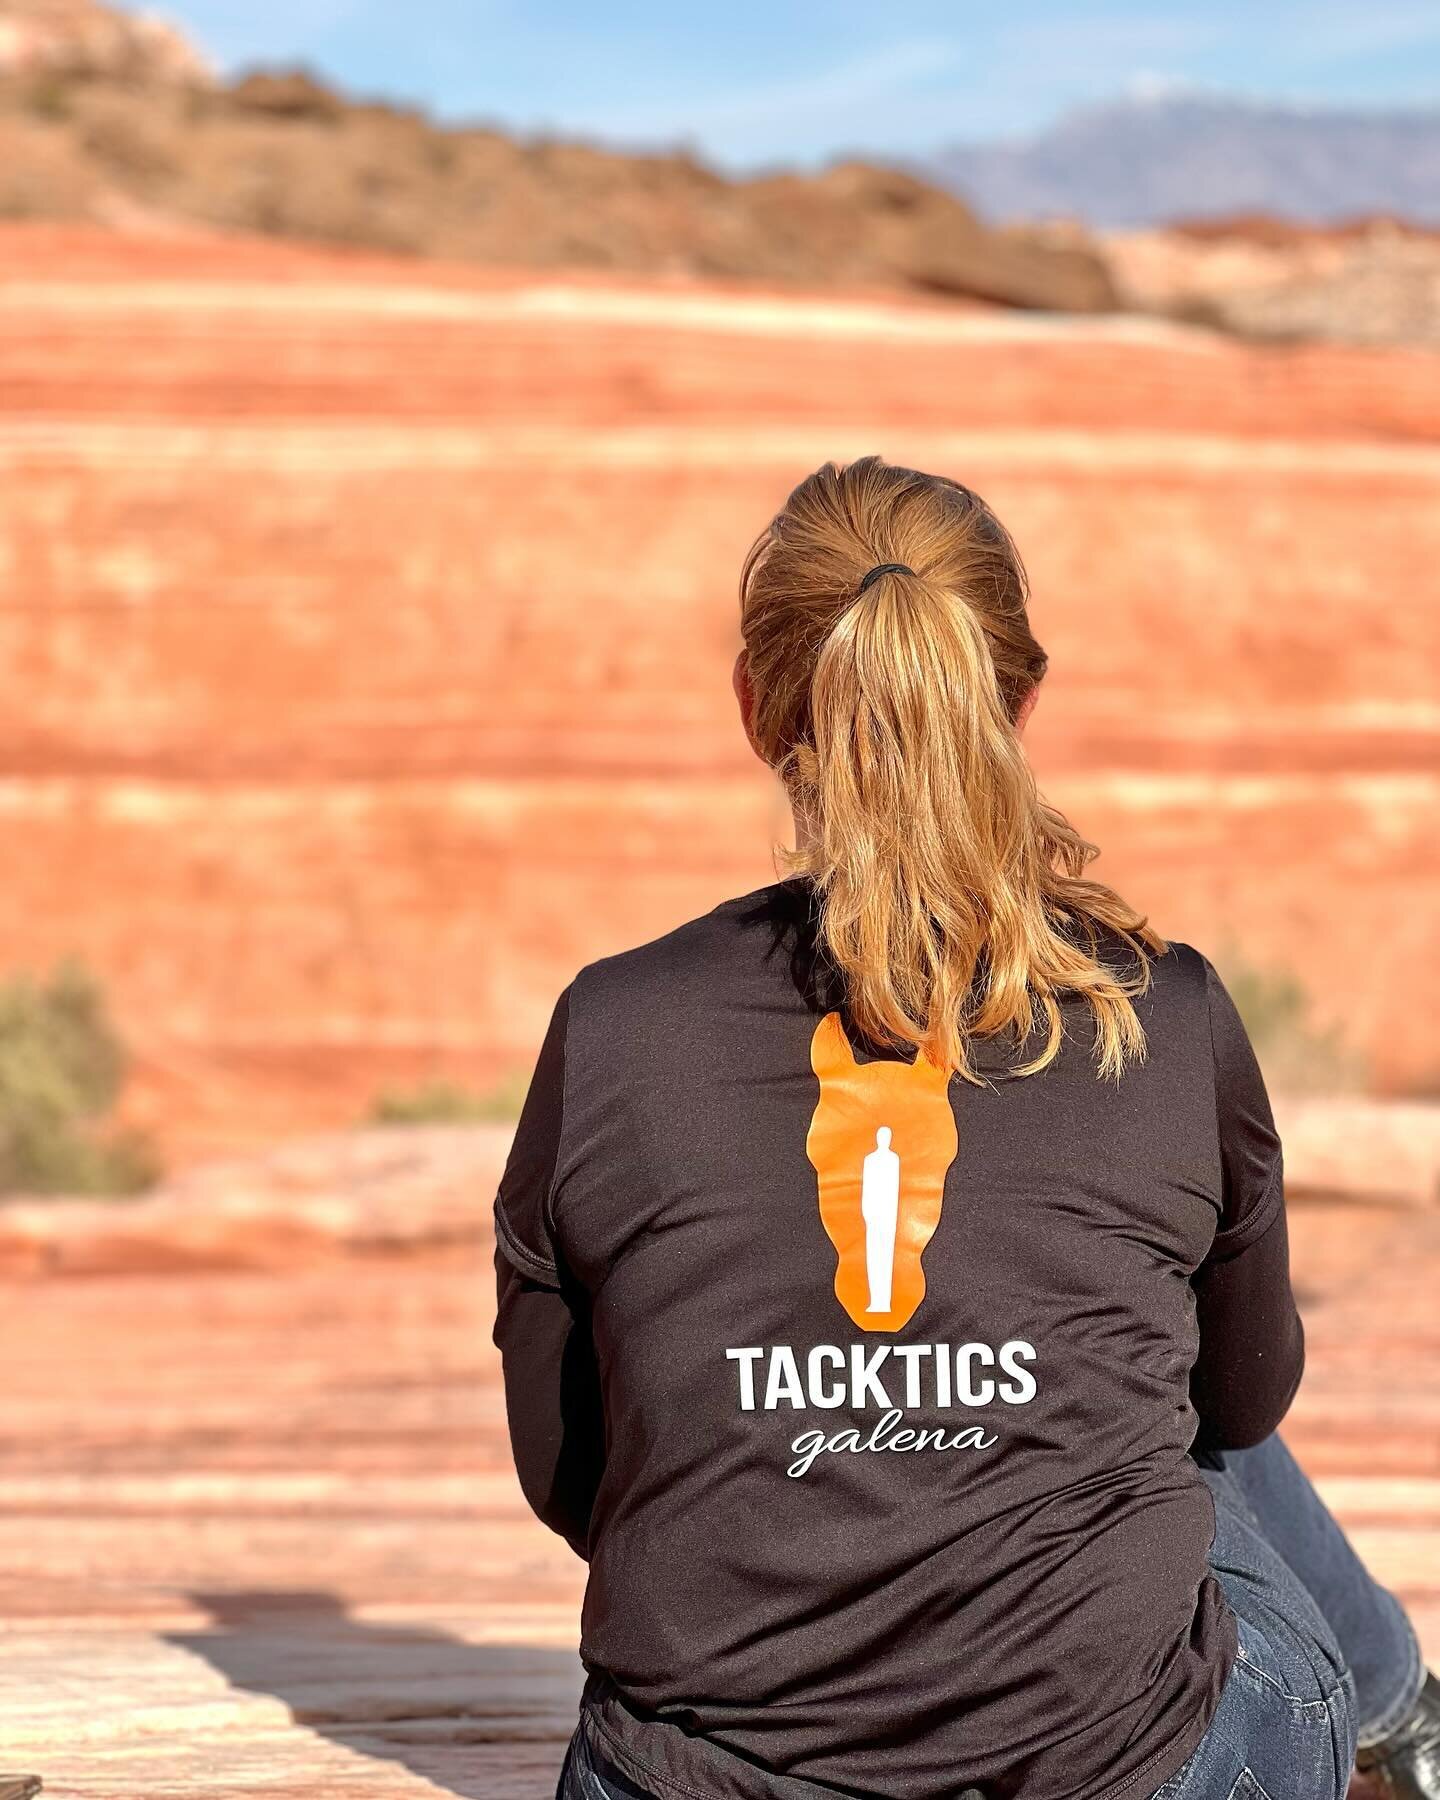 We&rsquo;ve been a little quiet lately as we&rsquo;ve been enjoying a family trip to Nevada! 🌵🏜️🐴 Of course, we met some new four-legged friends while out there. 🧡 #tackticsgalena 

www.tacktics-galena.com

#Leadership #teambuilding #skillstraini